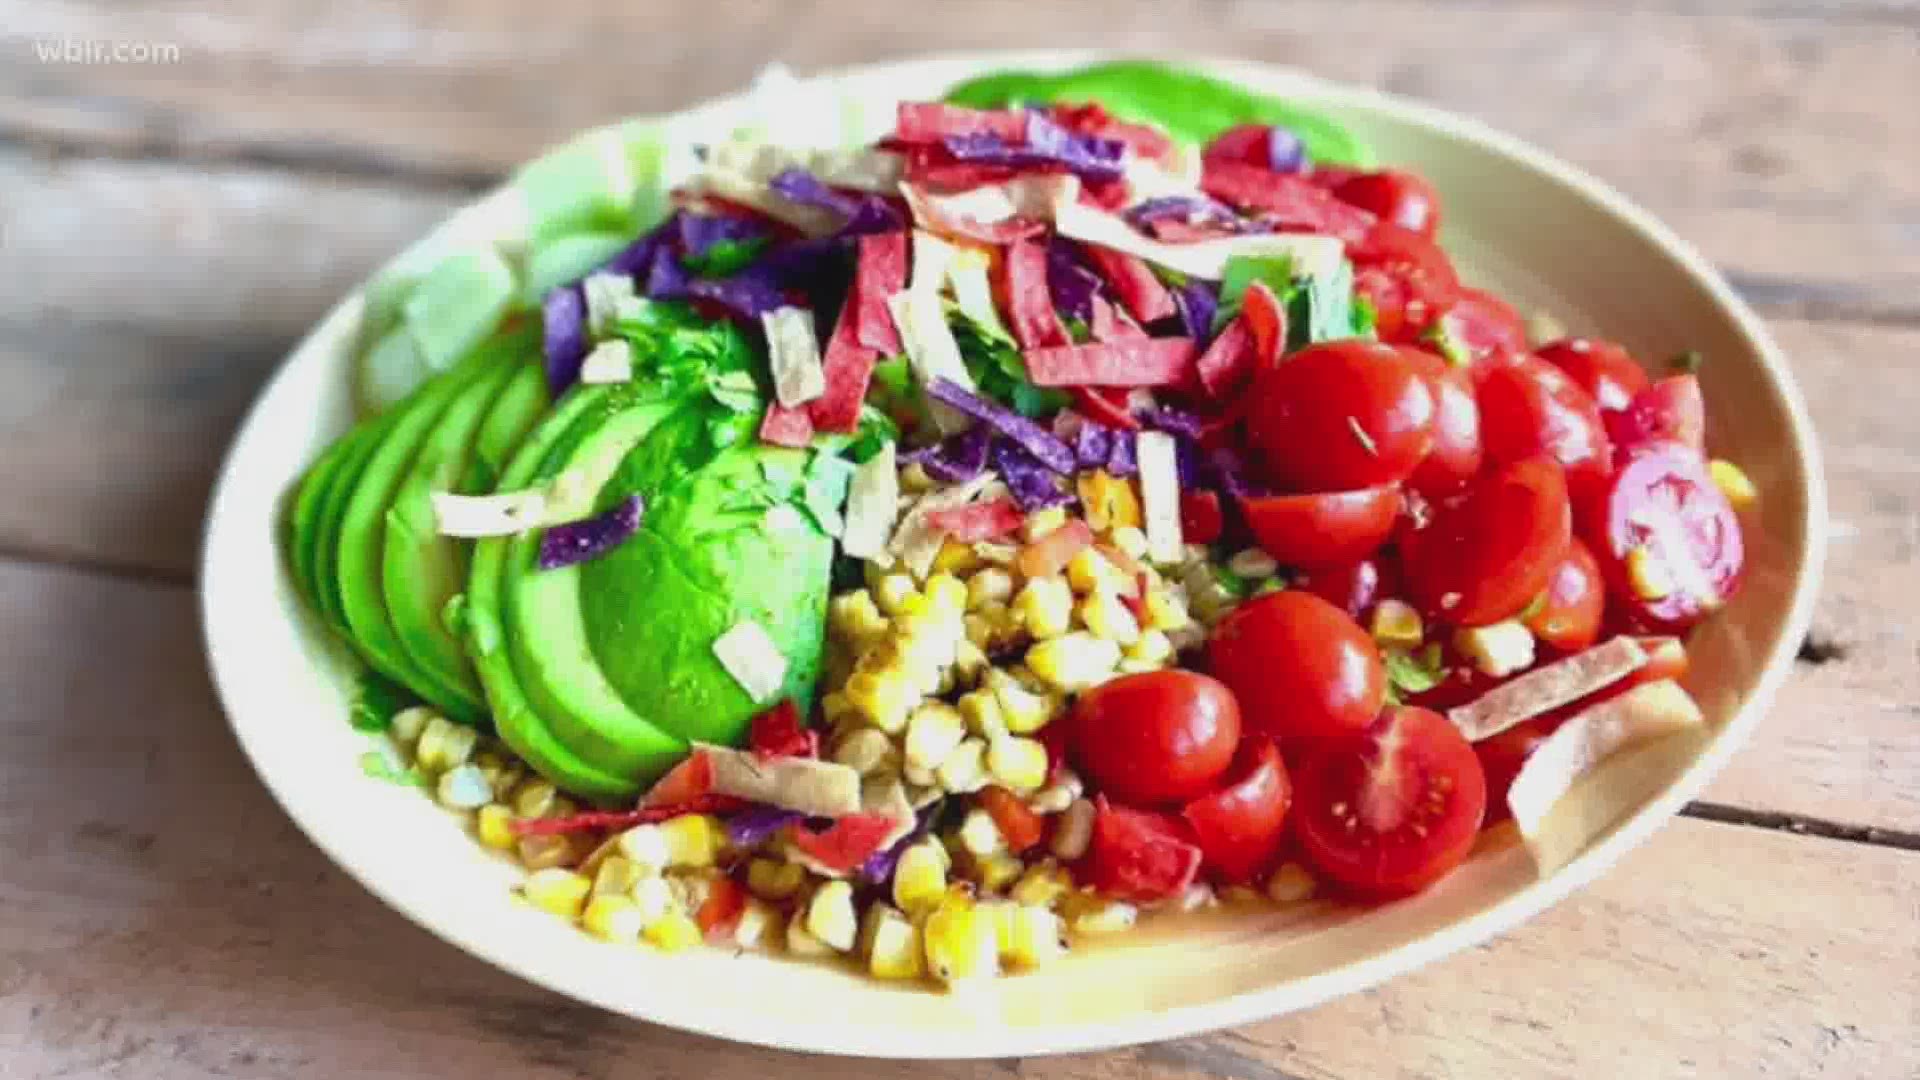 Jimmy with The Old Mill makes Skillet Roasted Corn Salad with Pepper Jelly Dressing. June 26, 2020-4pm.